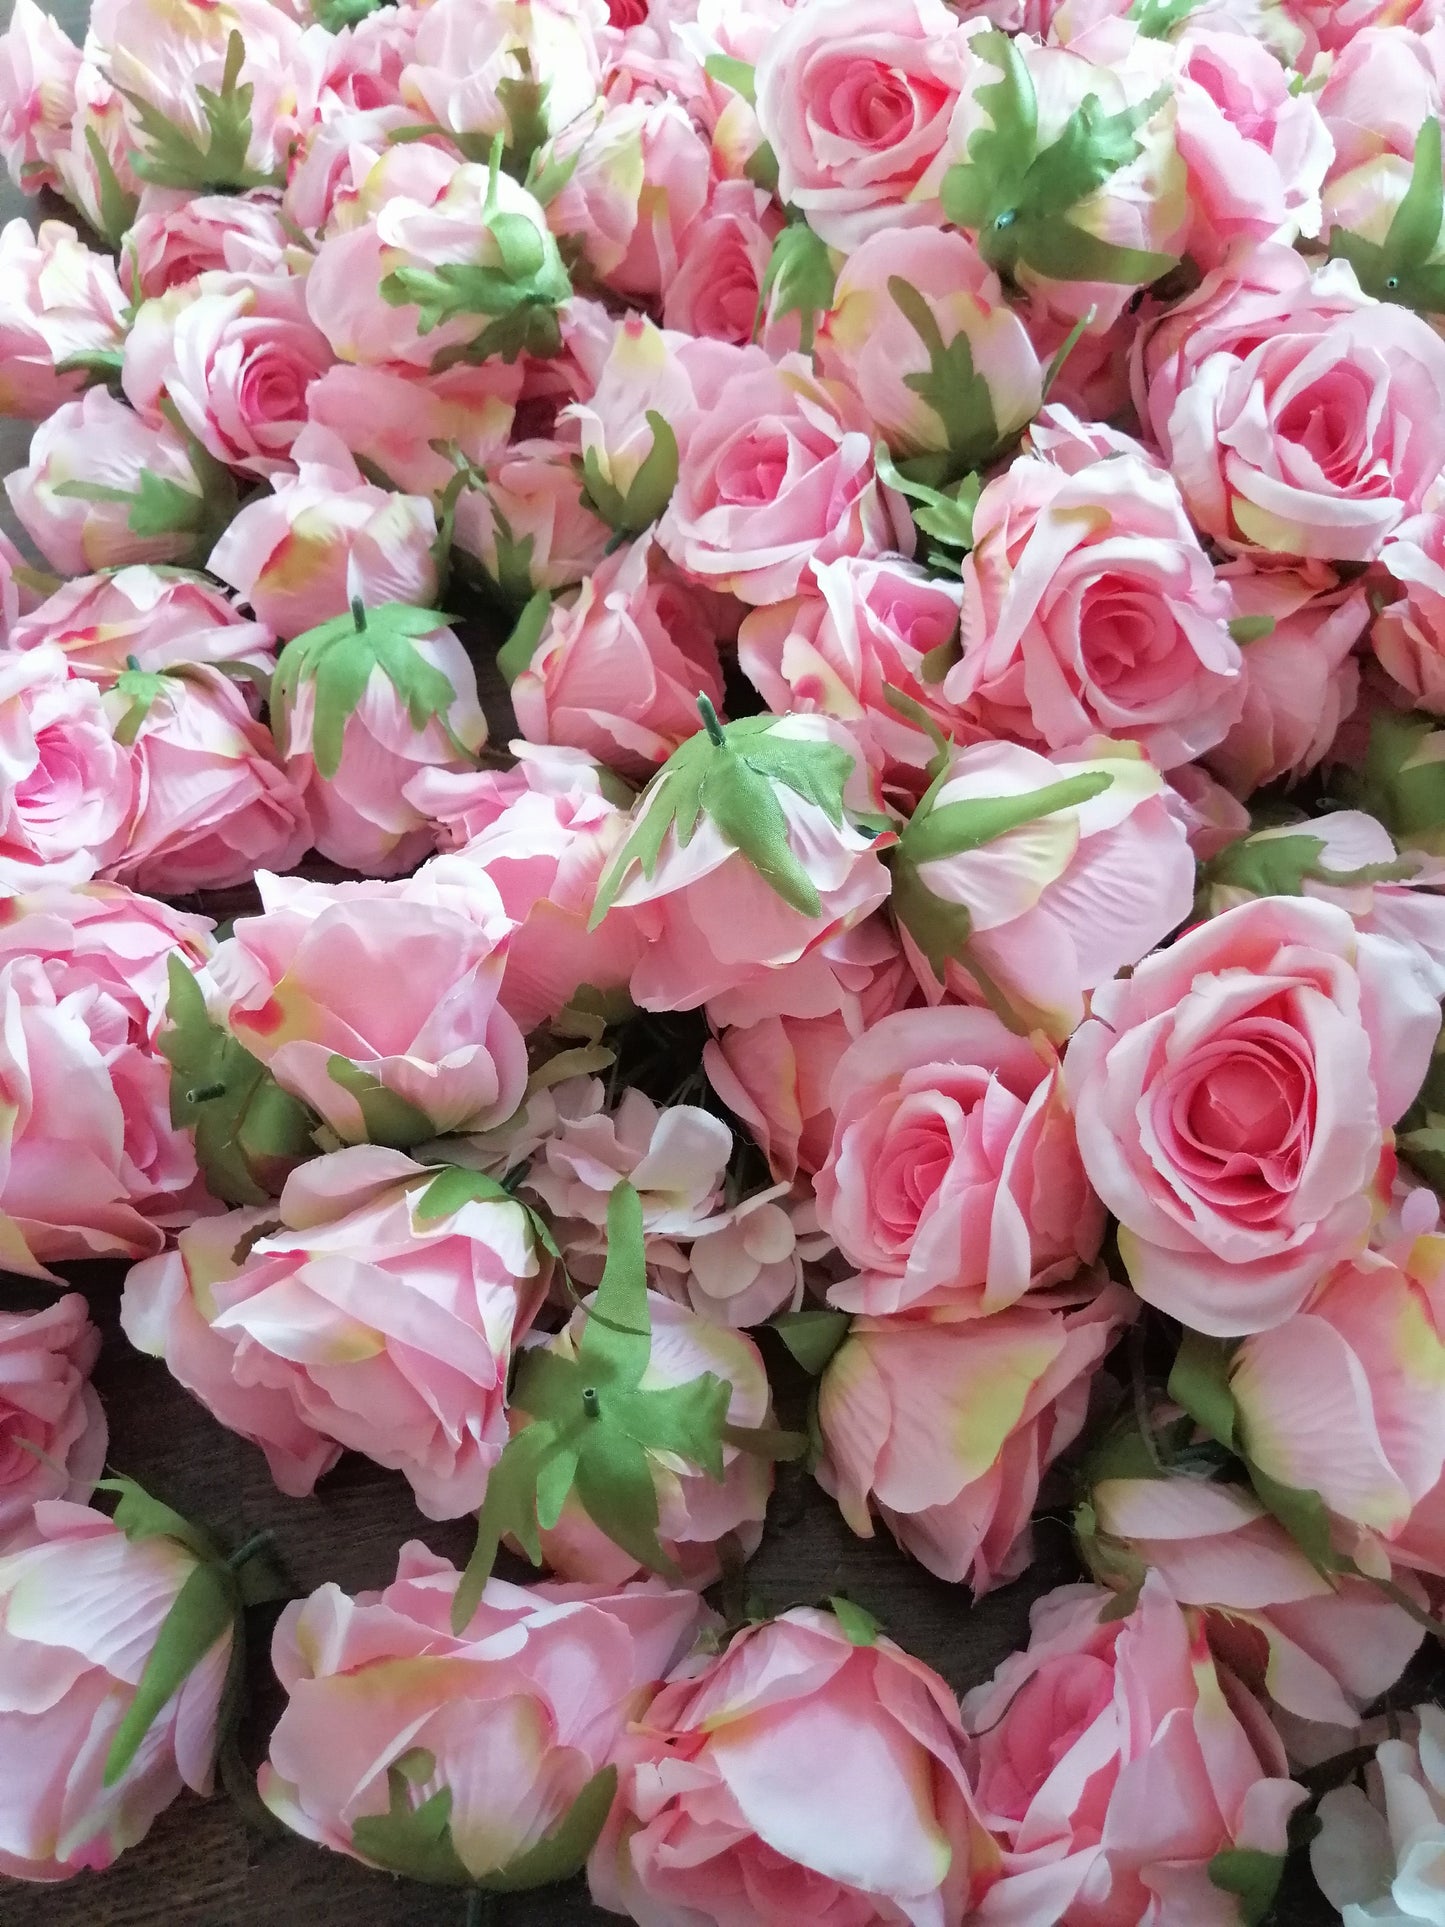 Wholesale Ivory/Pink Wedding Flowers 50Heads Artificial Simulation Silk Rose Diam.10cm Party Decoration DIY Background Layout